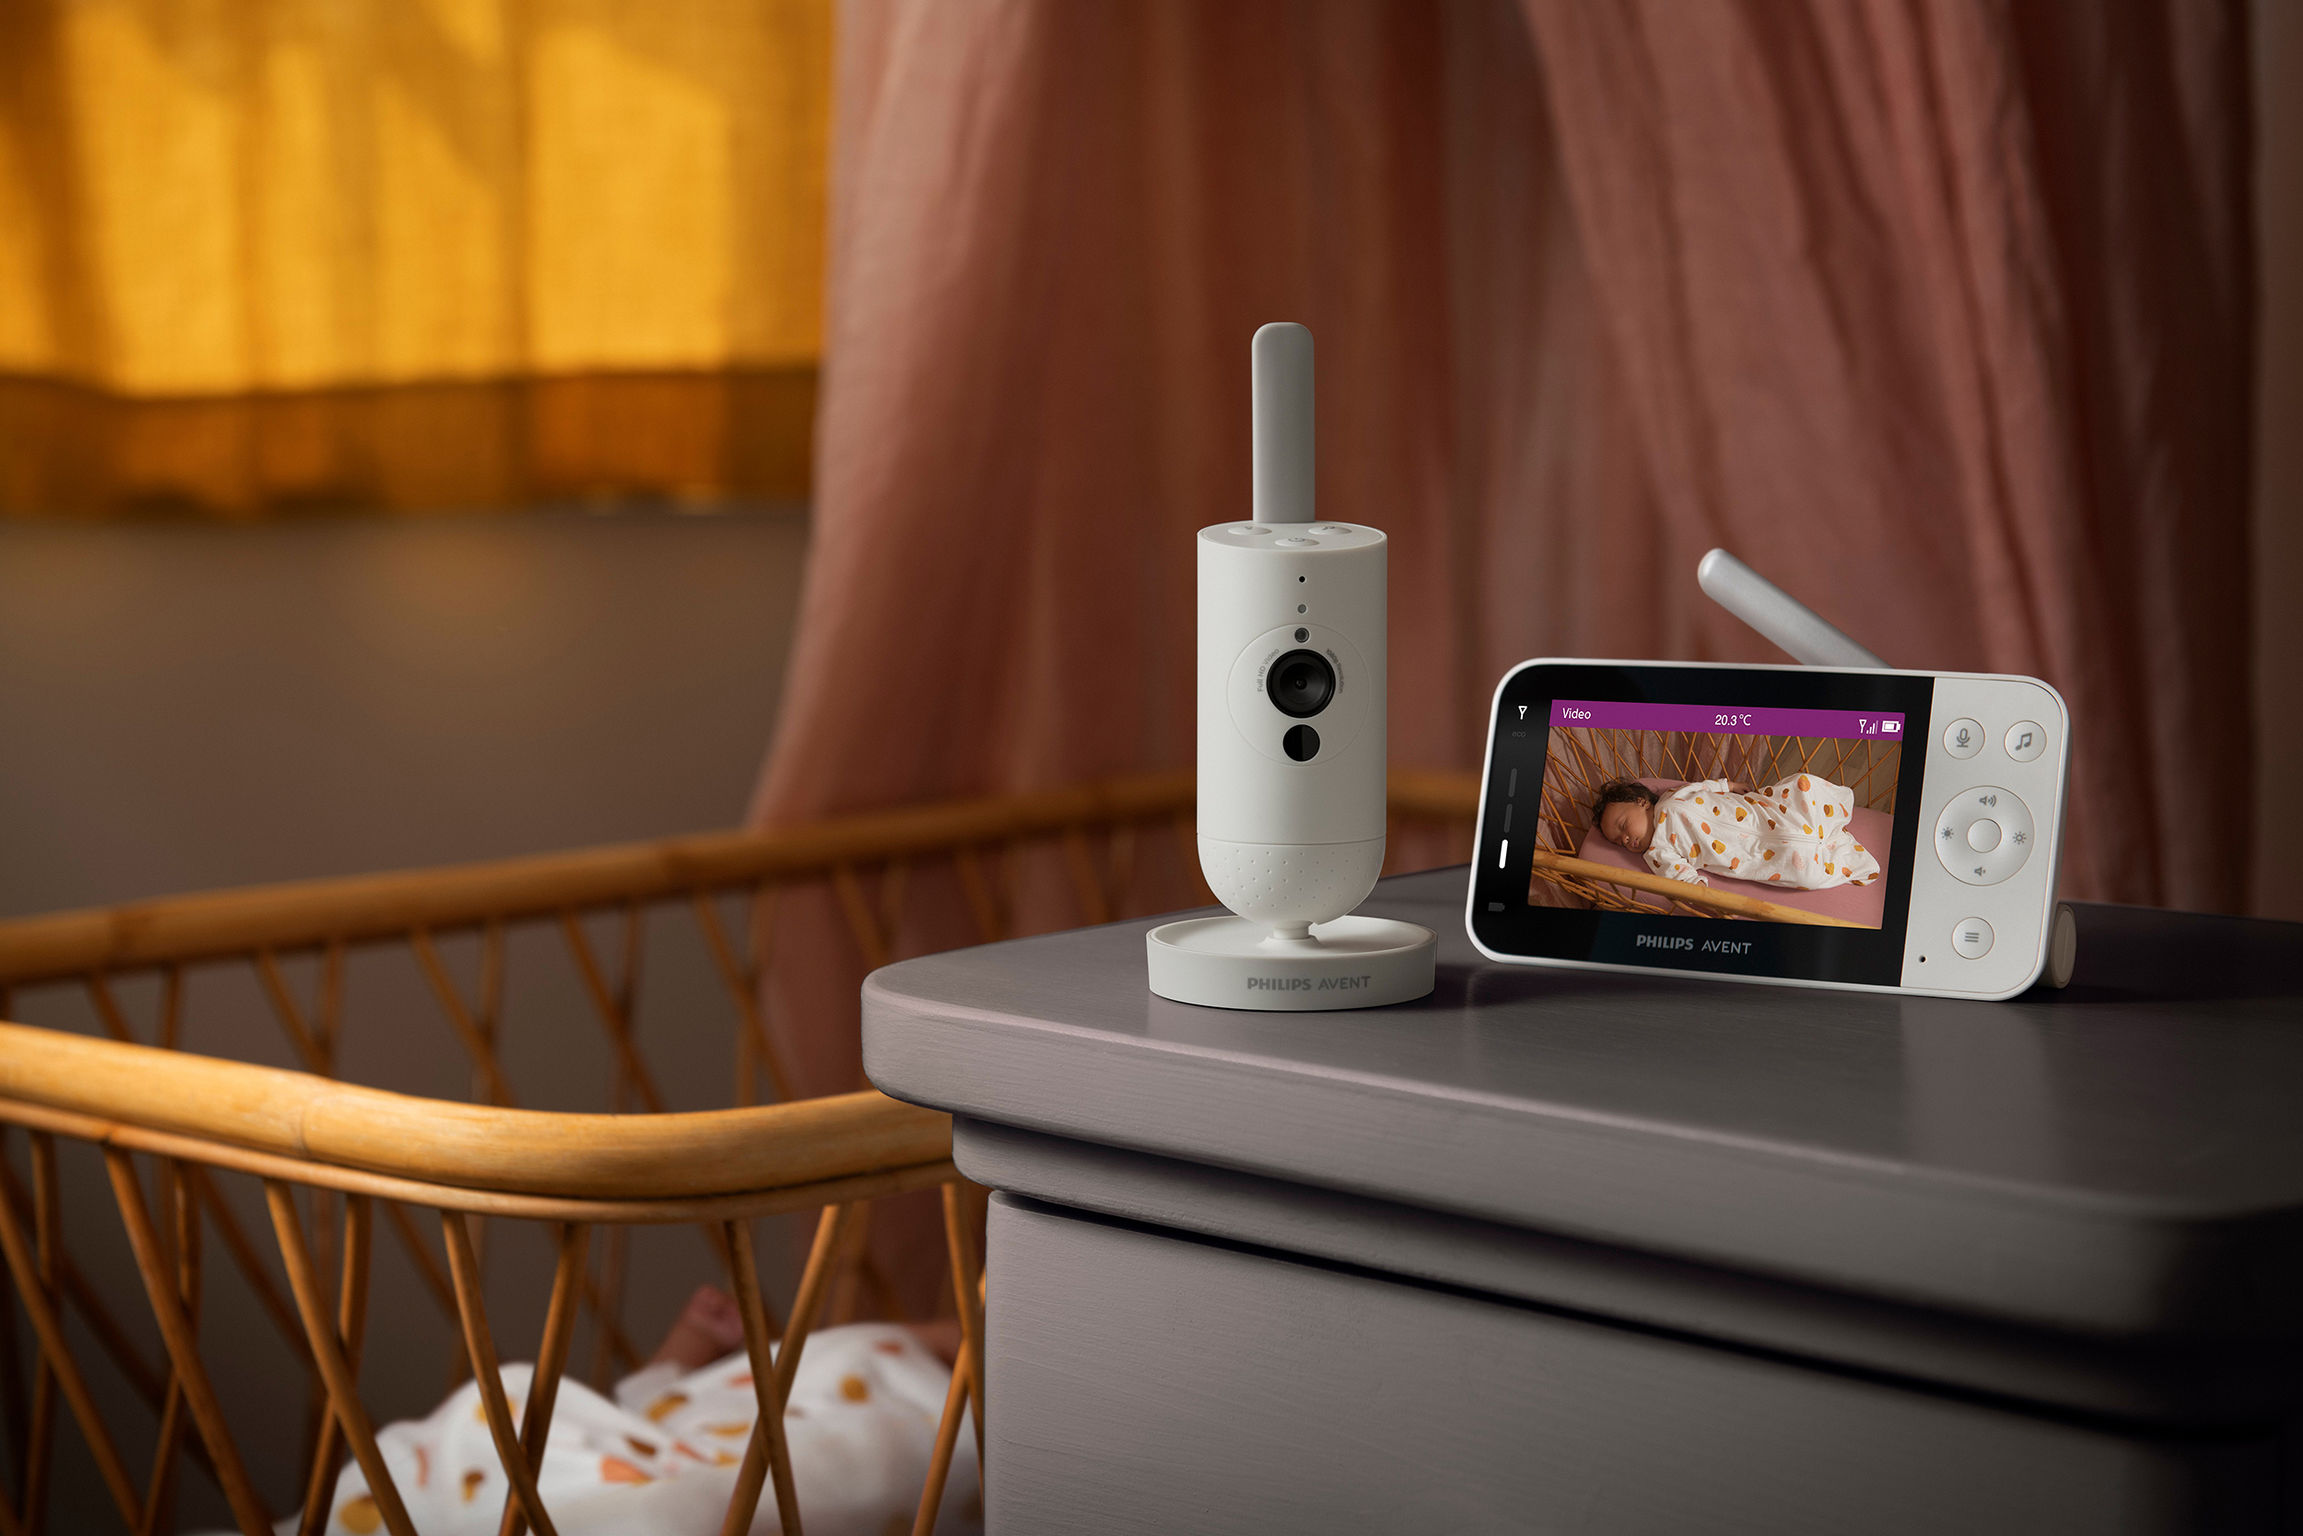 Philips Avent Night Owl Connected baby/video monitor